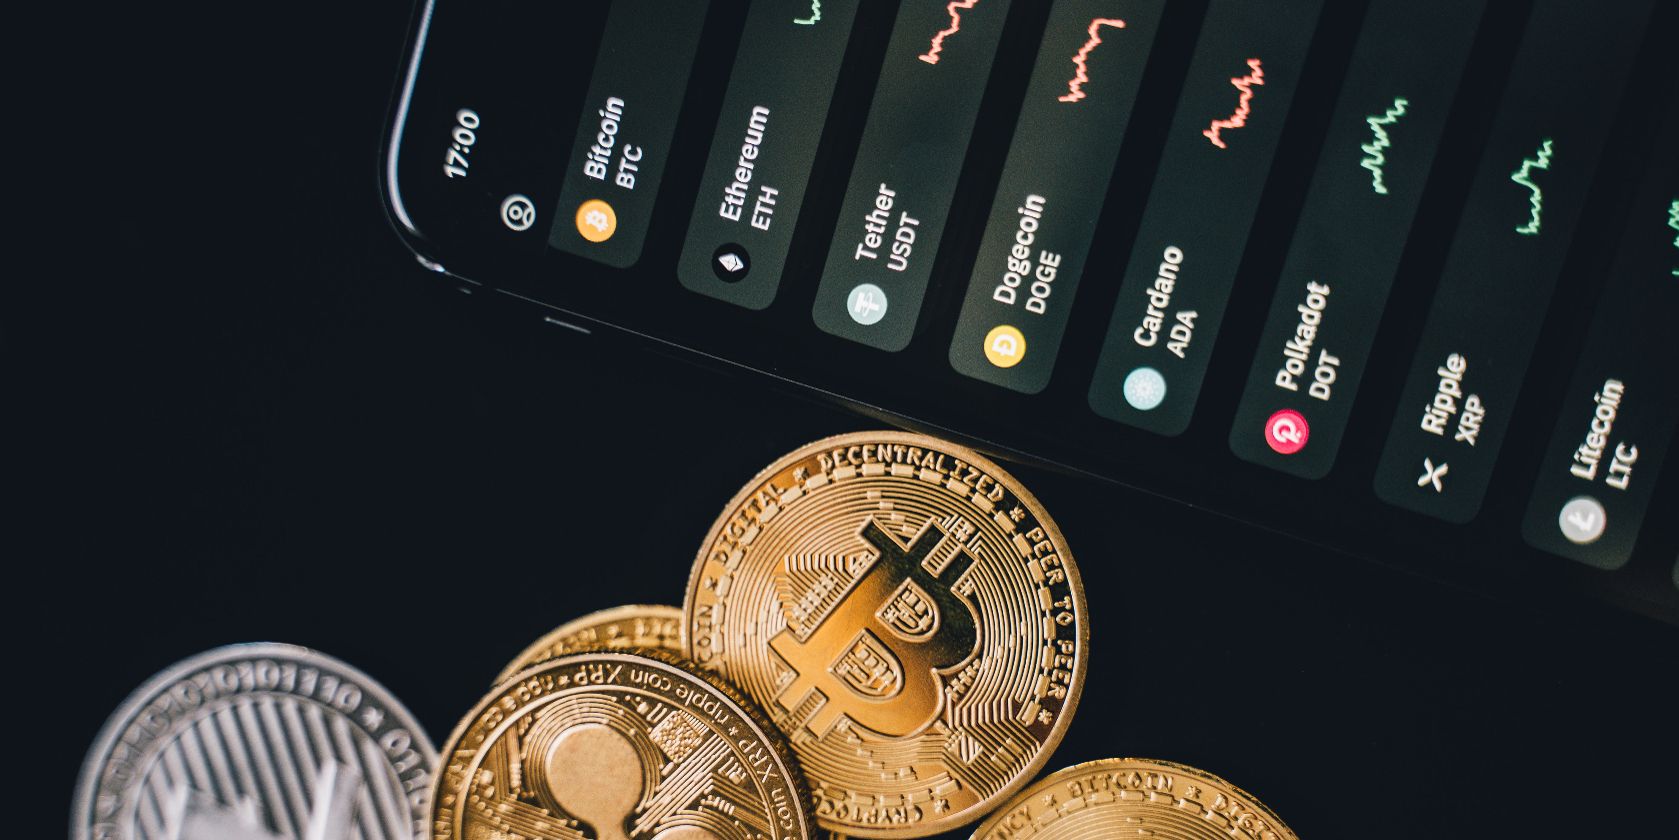 crypto coins next to exchange on phone